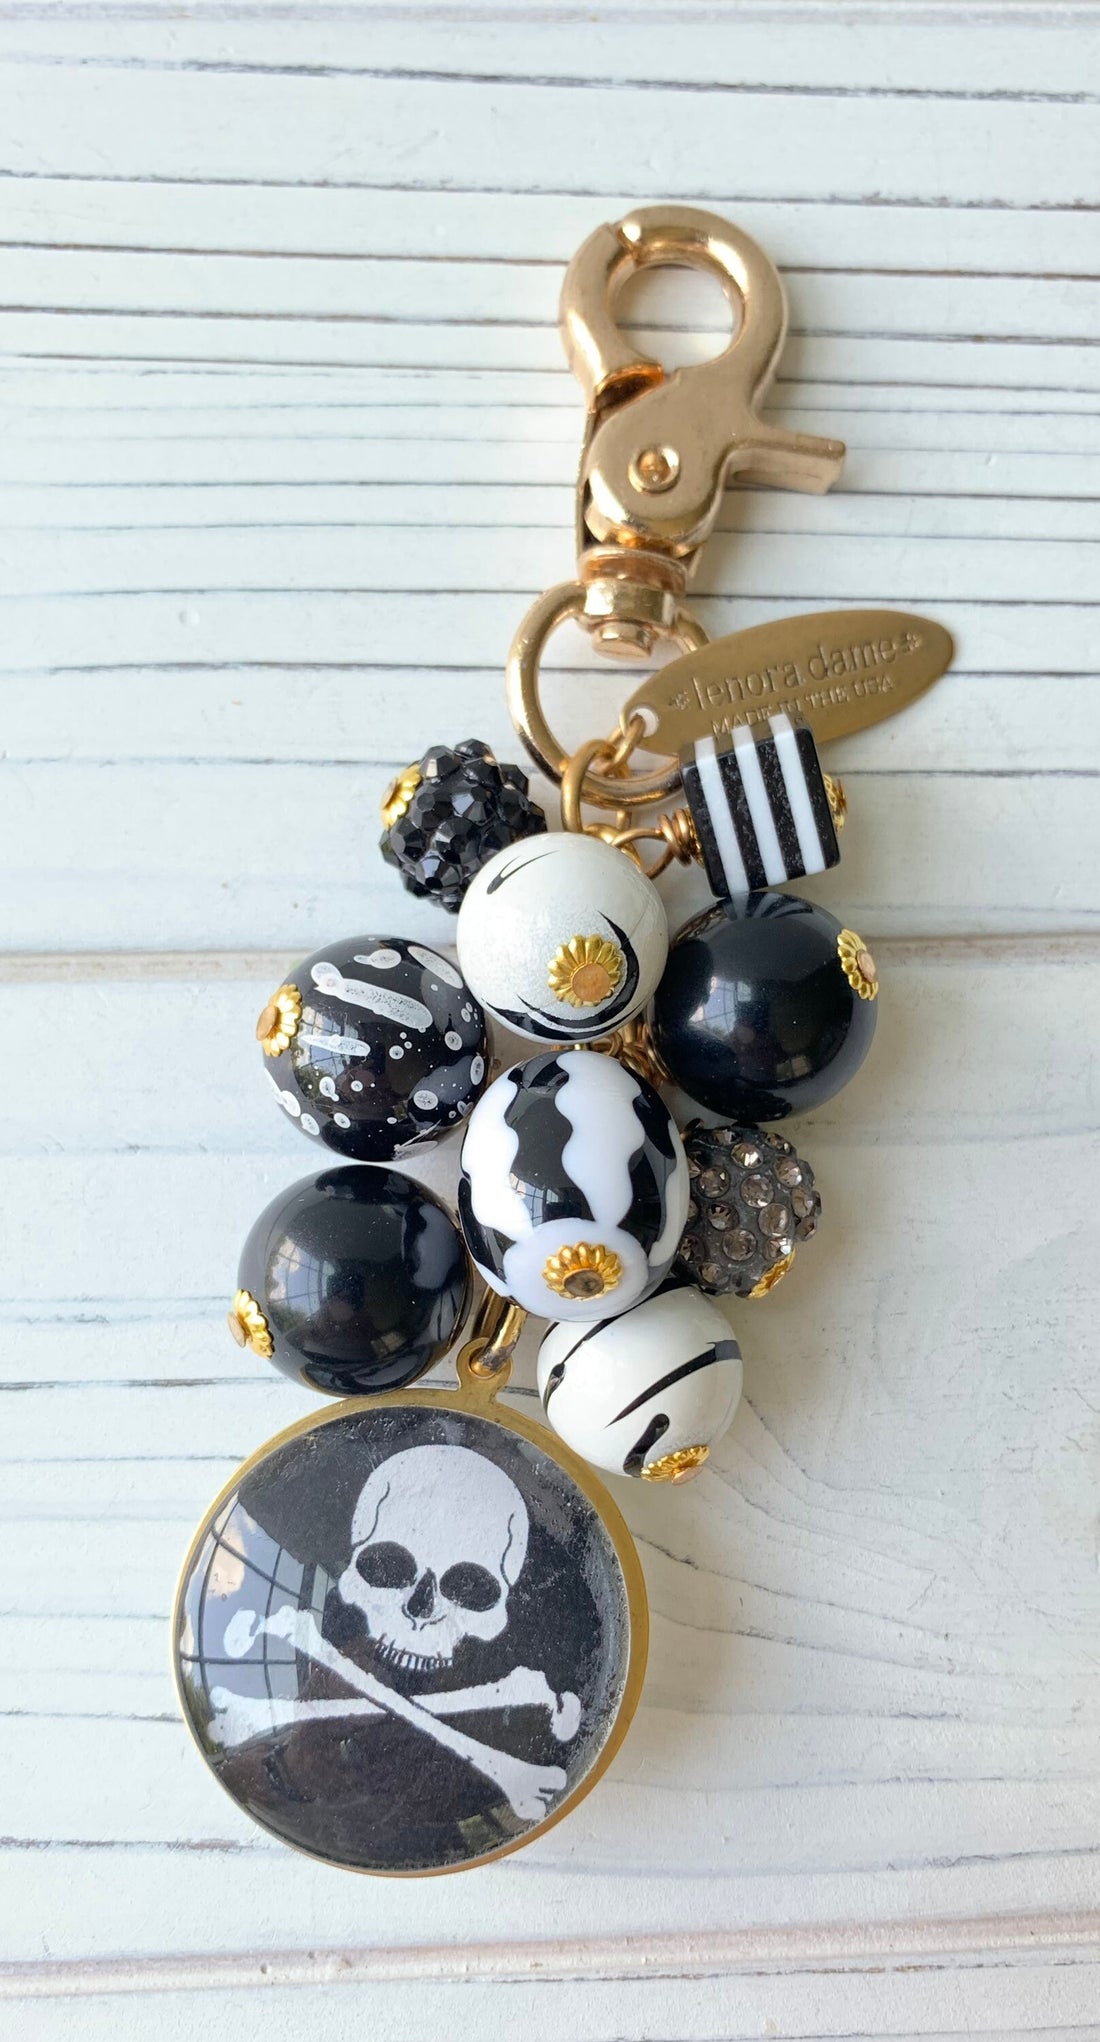 Lenora Dame Halloween purse charm with a mix of different patterned black and white beads wire wrapped on a gold-plated cable chain. A white skull and crossbones with black background picture under a domed glass lens mounted on a round brass charm hangs from the bottom. Gold trigger clasp is at the top.